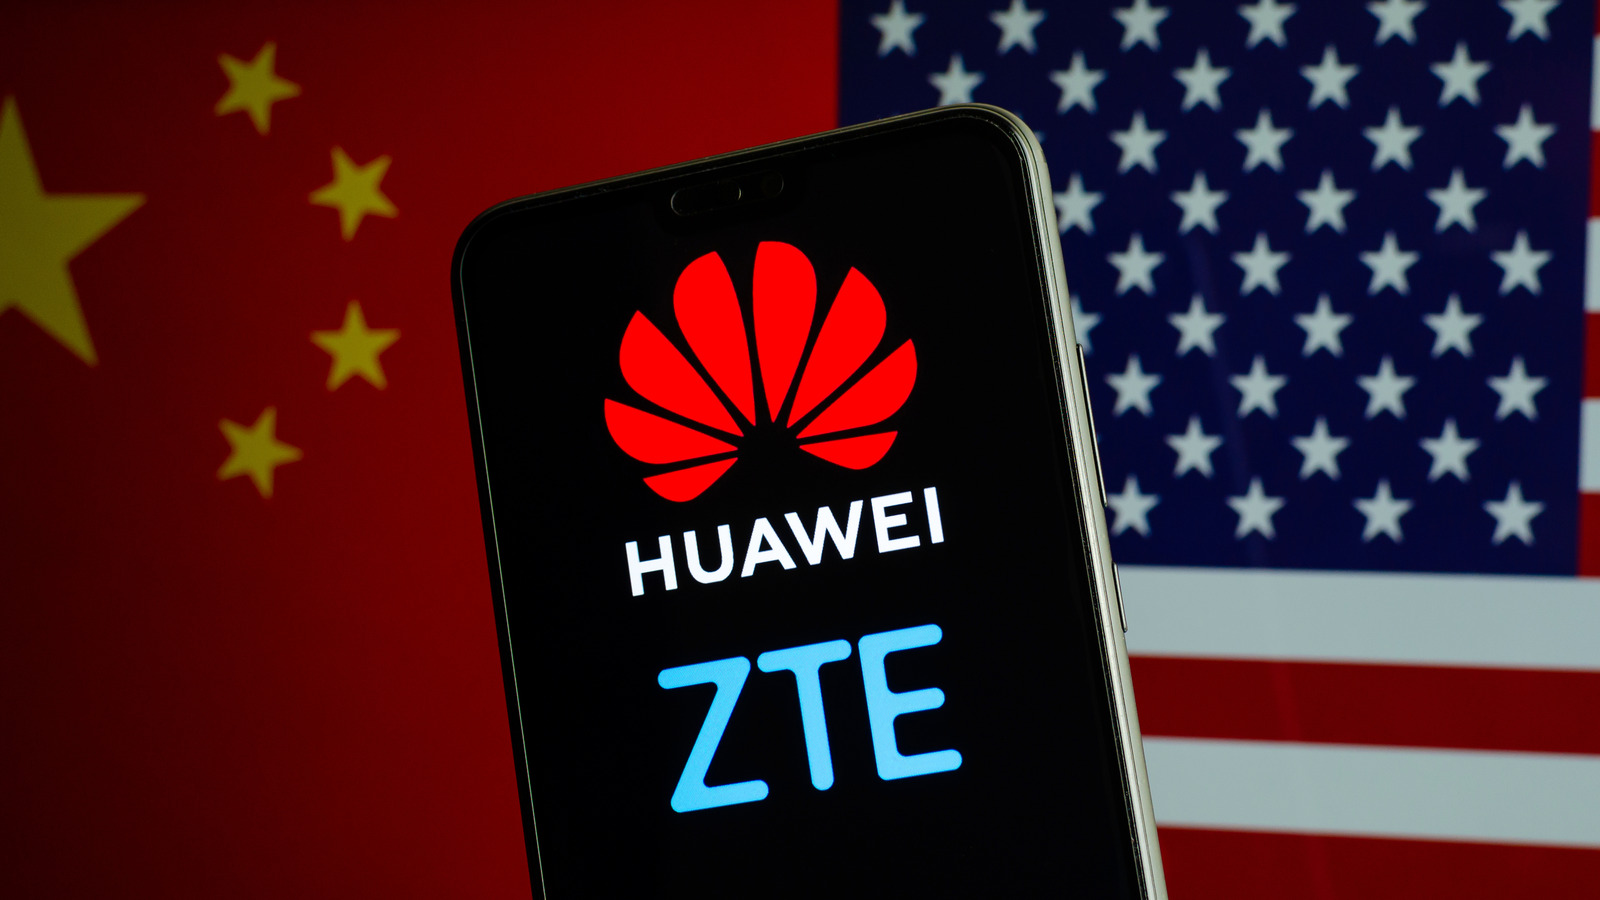 huawei-and-zte-just-landed-on-the-fcc-s-worst-blocklist-slashgear